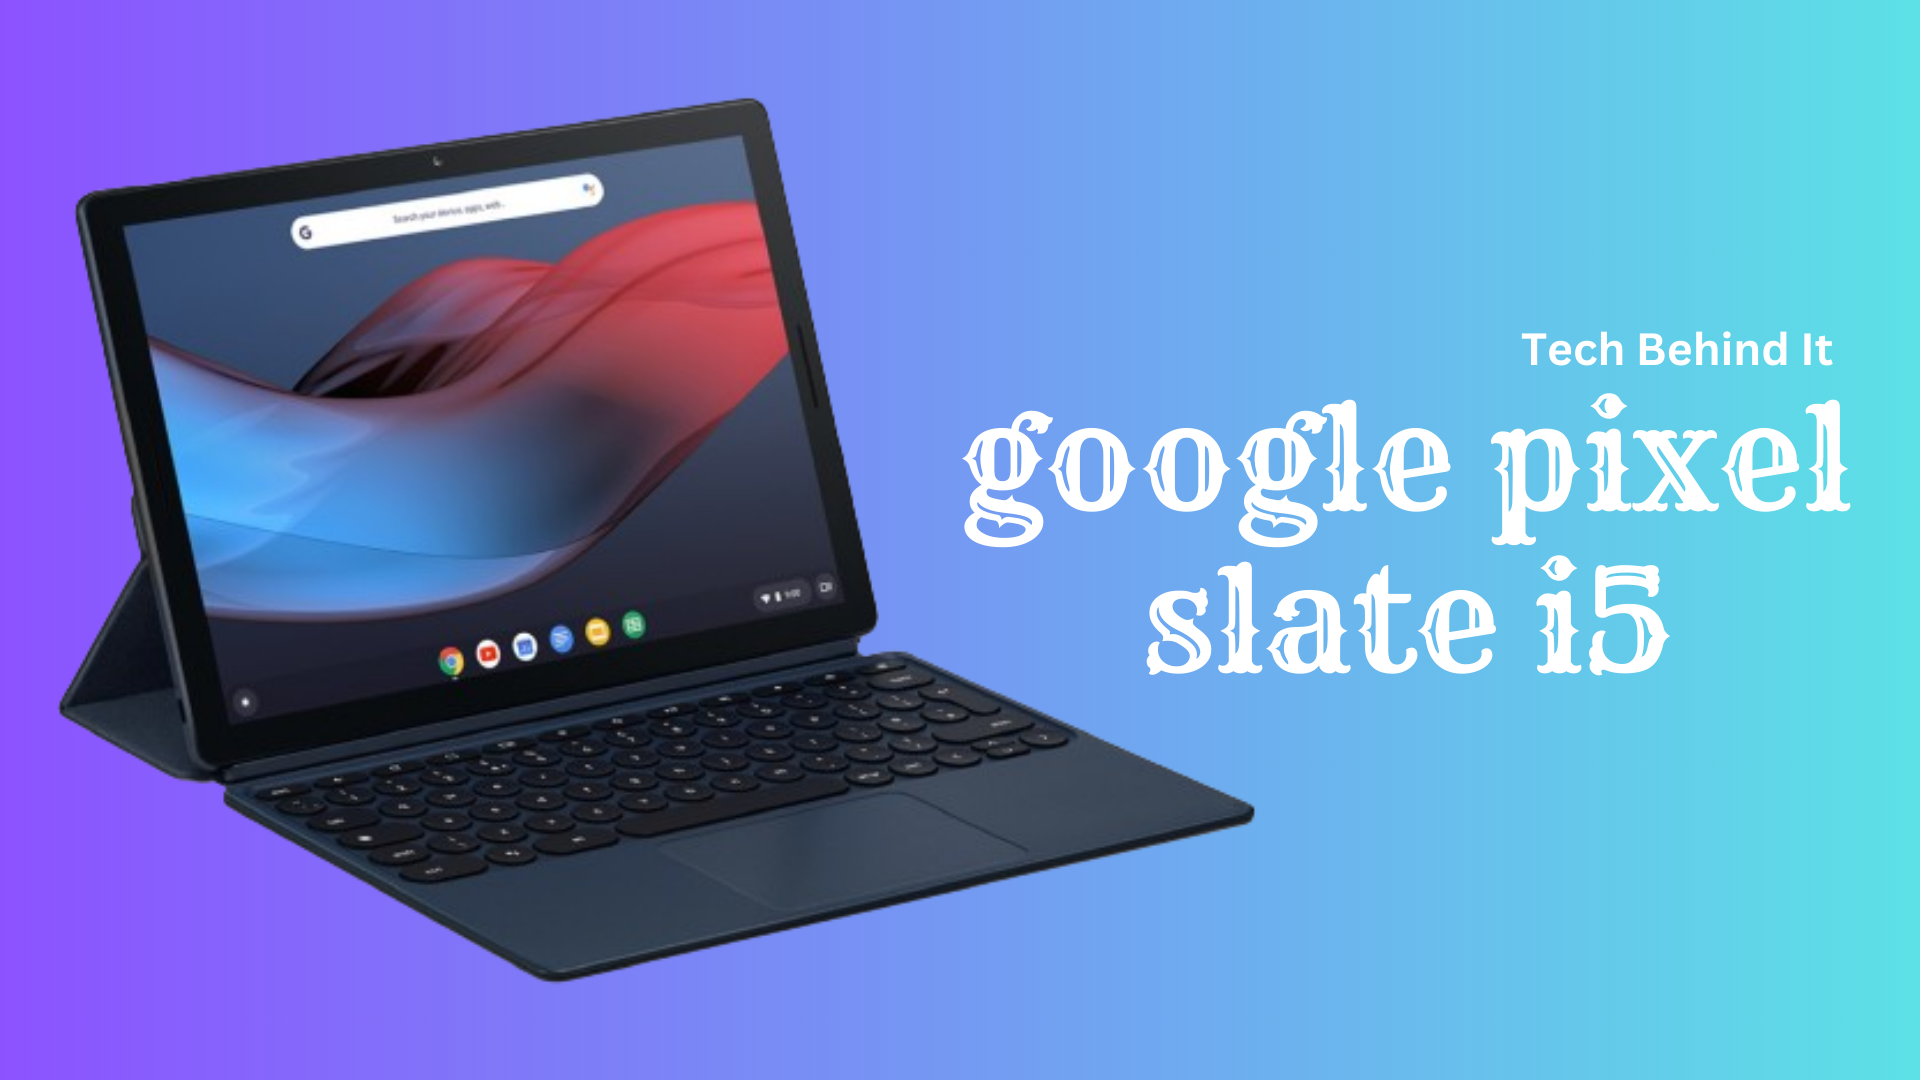 Google Pixel Slate i5: A Powerful yet Flawed Premium Chrome OS Tablet